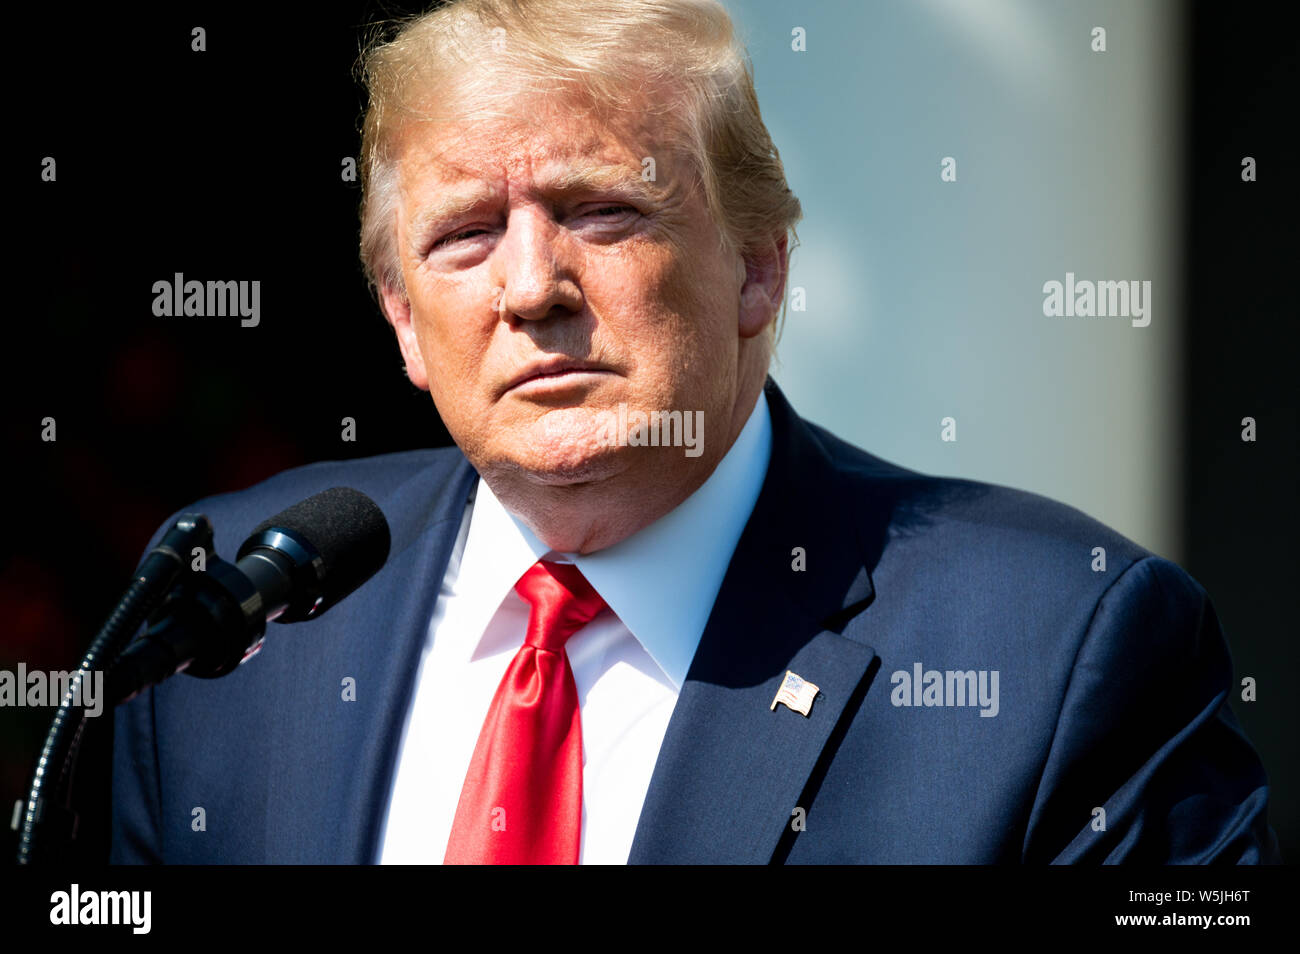 President Donald Trump speaks during the bill signing of  H.R.1327 - Never Forget the Heroes: James Zadroga, Ray Pfeifer, and Luis Alvarez Permanent Authorization of the September 11th Victim Compensation Fund Act at the Rose Garden, White House in Washington, DC. Stock Photo